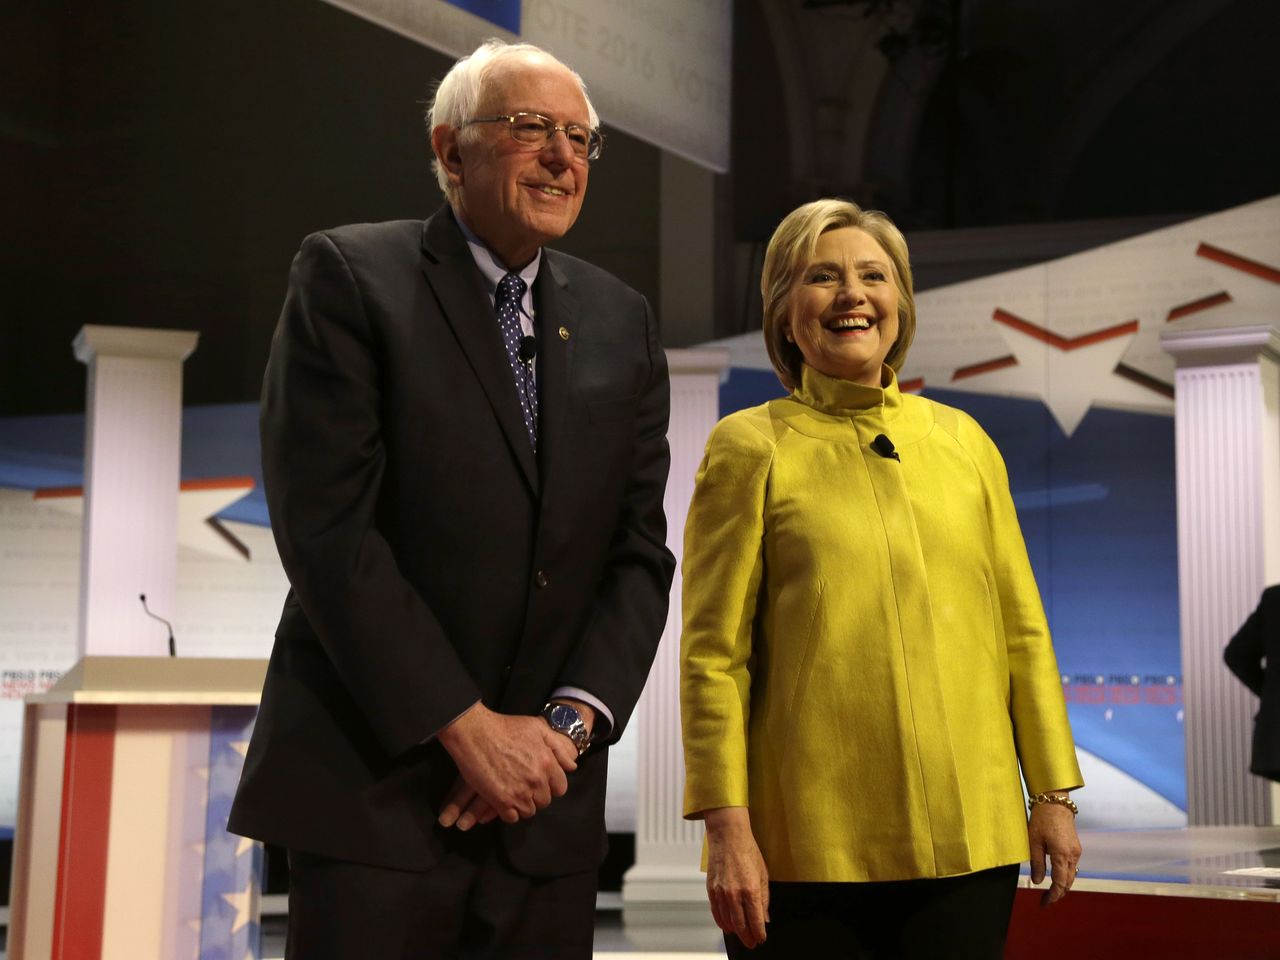 Democratic candidates Sen. Bernie Sanders and Hillary Clinton they take the stage at the University of Wisconsin-Milwaukee on Thursday.